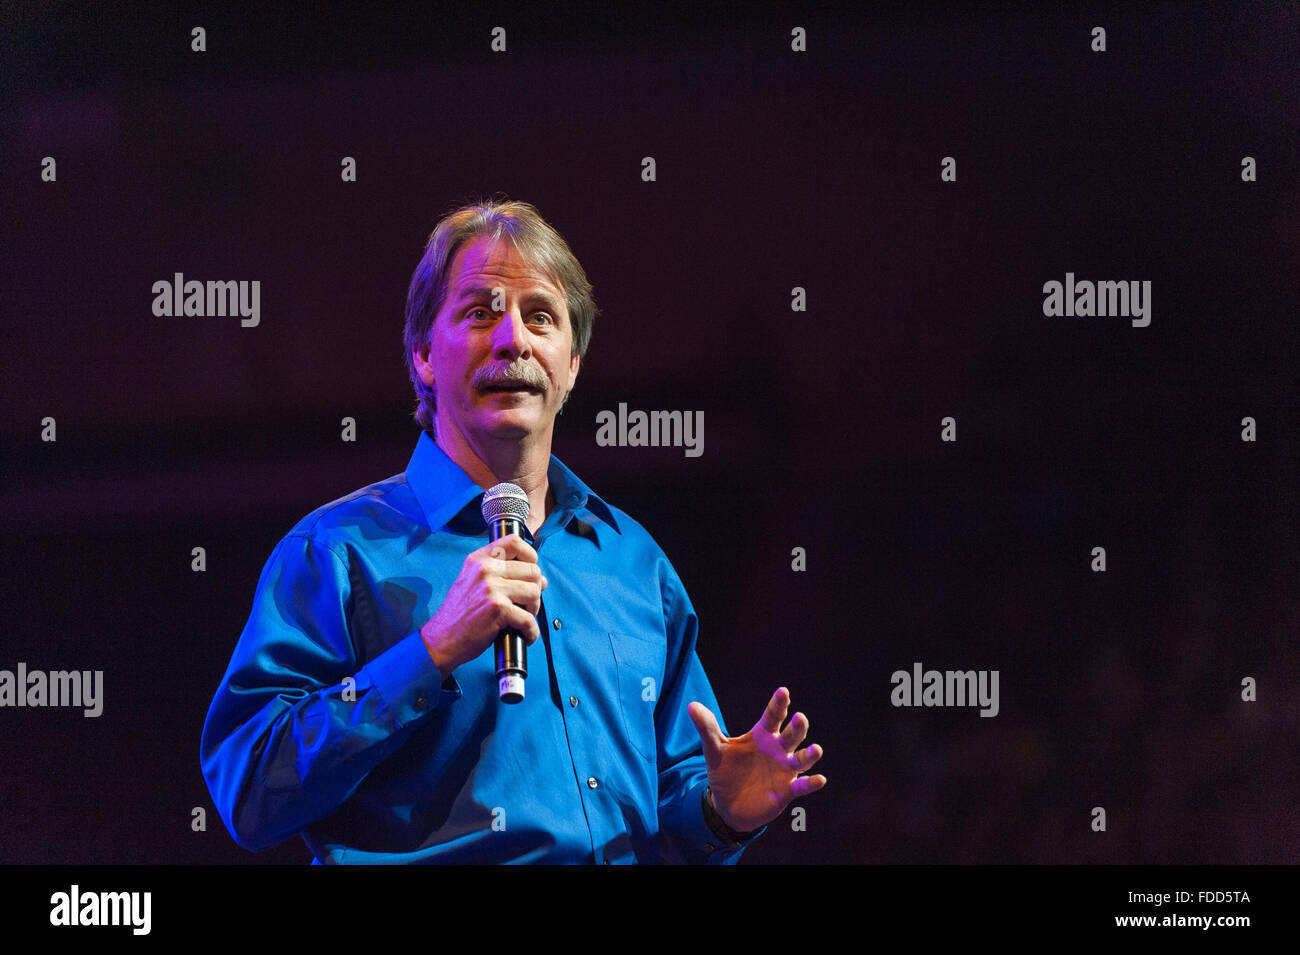 American television personality and blue collar comedian Jeff Foxworthy on stage. Stock Photo